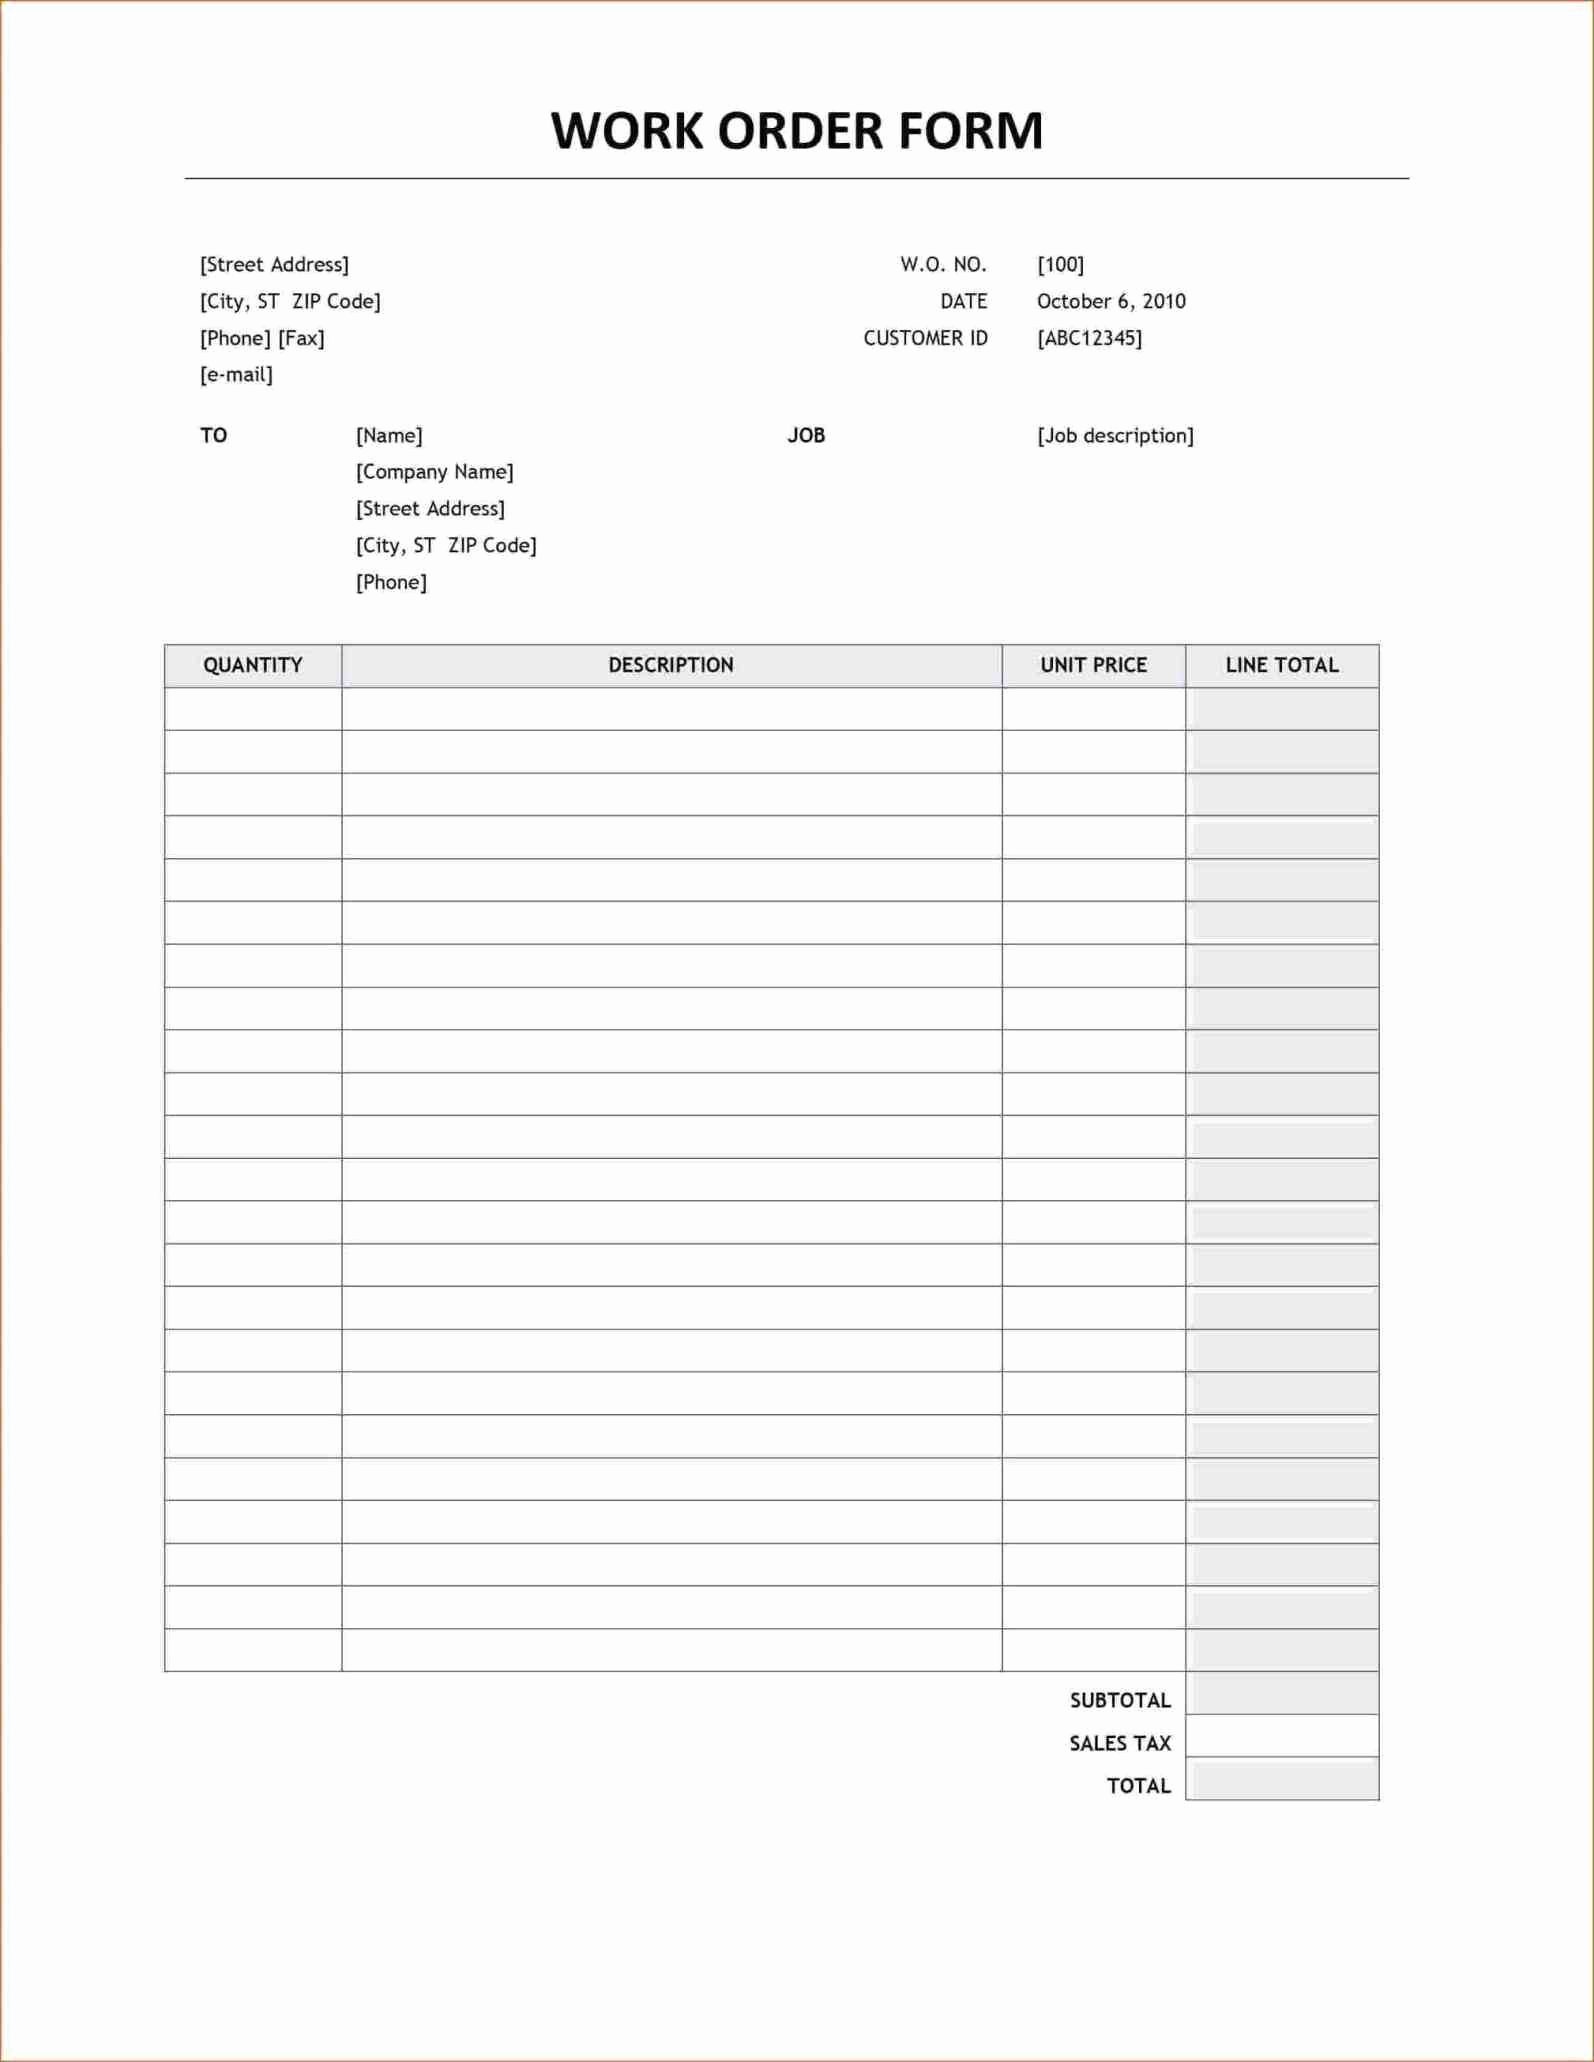 Simple order form Template New Simple Simple order form Template Word order form Template